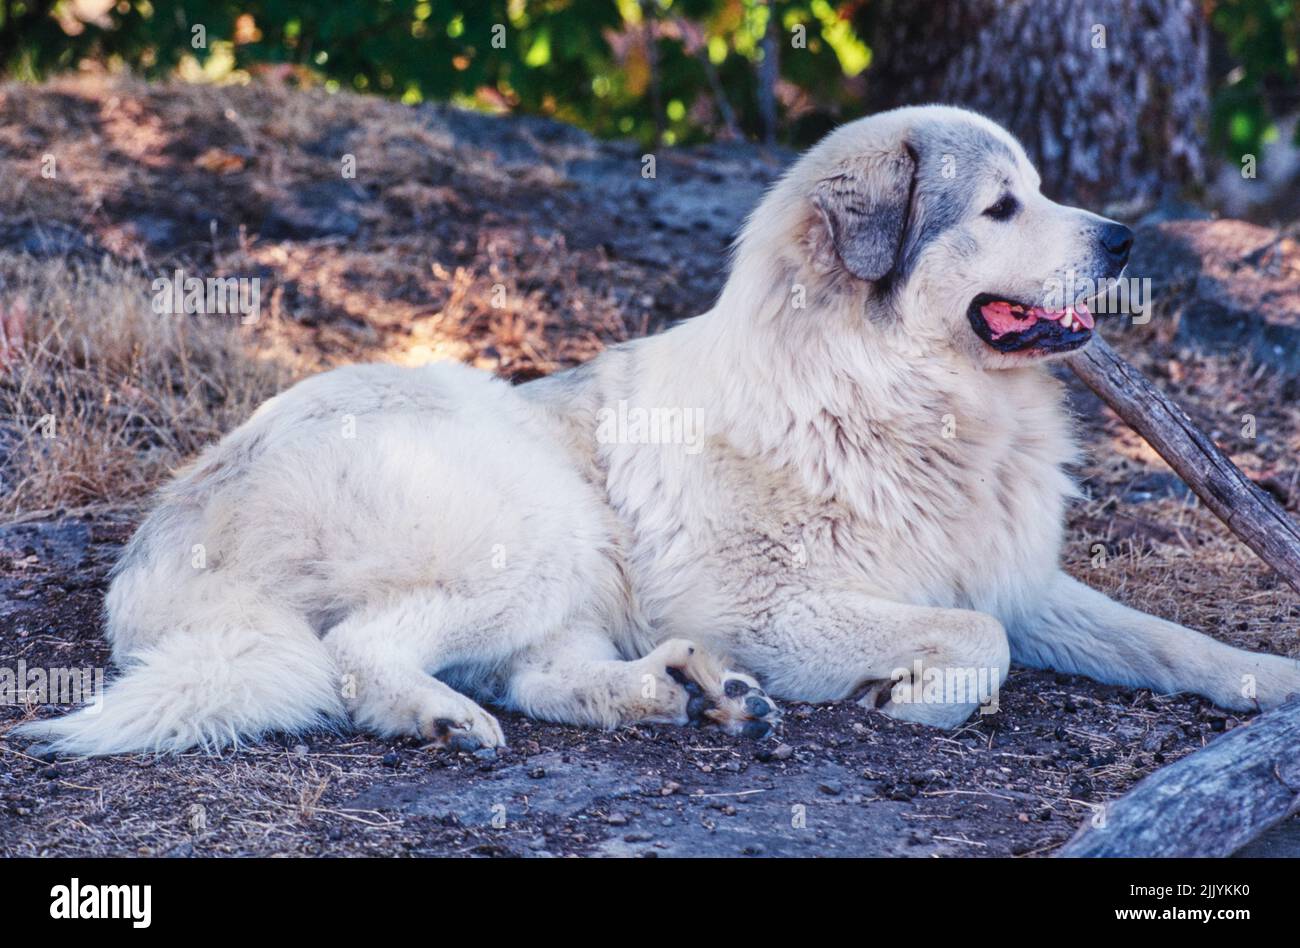 A Great Pyrenees dog in dirt Stock Photo